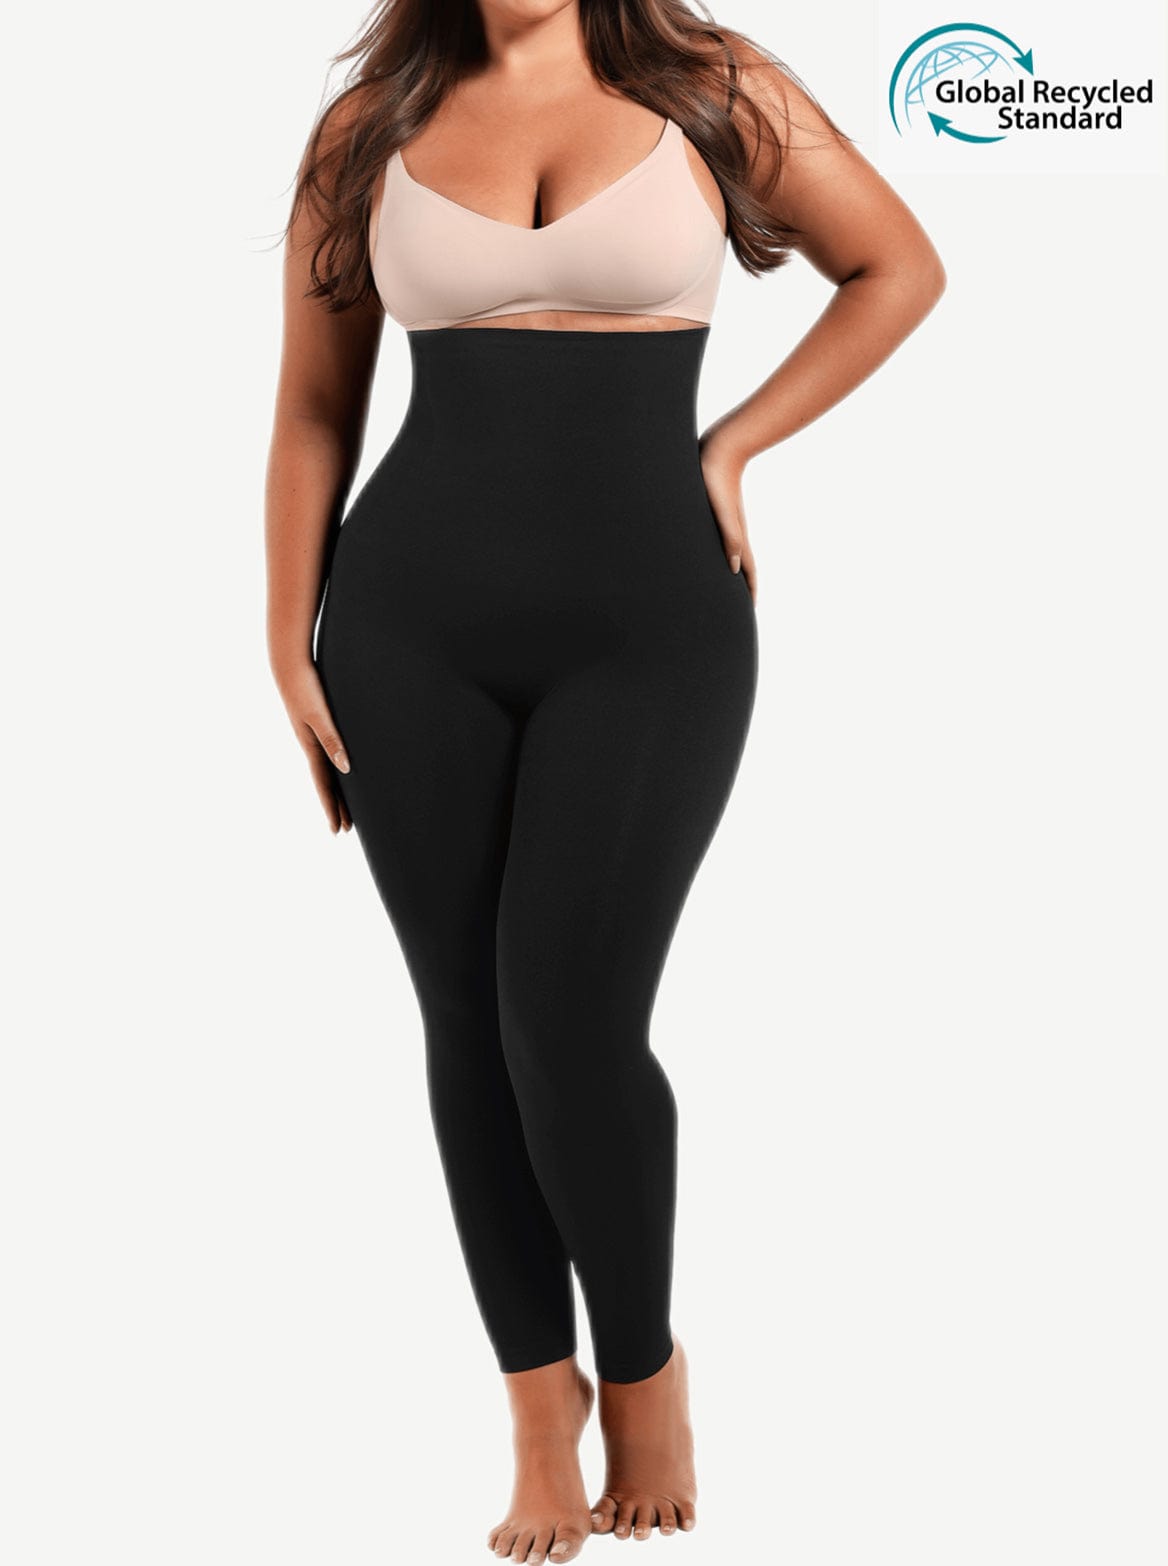 Find Butt Lifting Leggings Wholesale with Well Quality